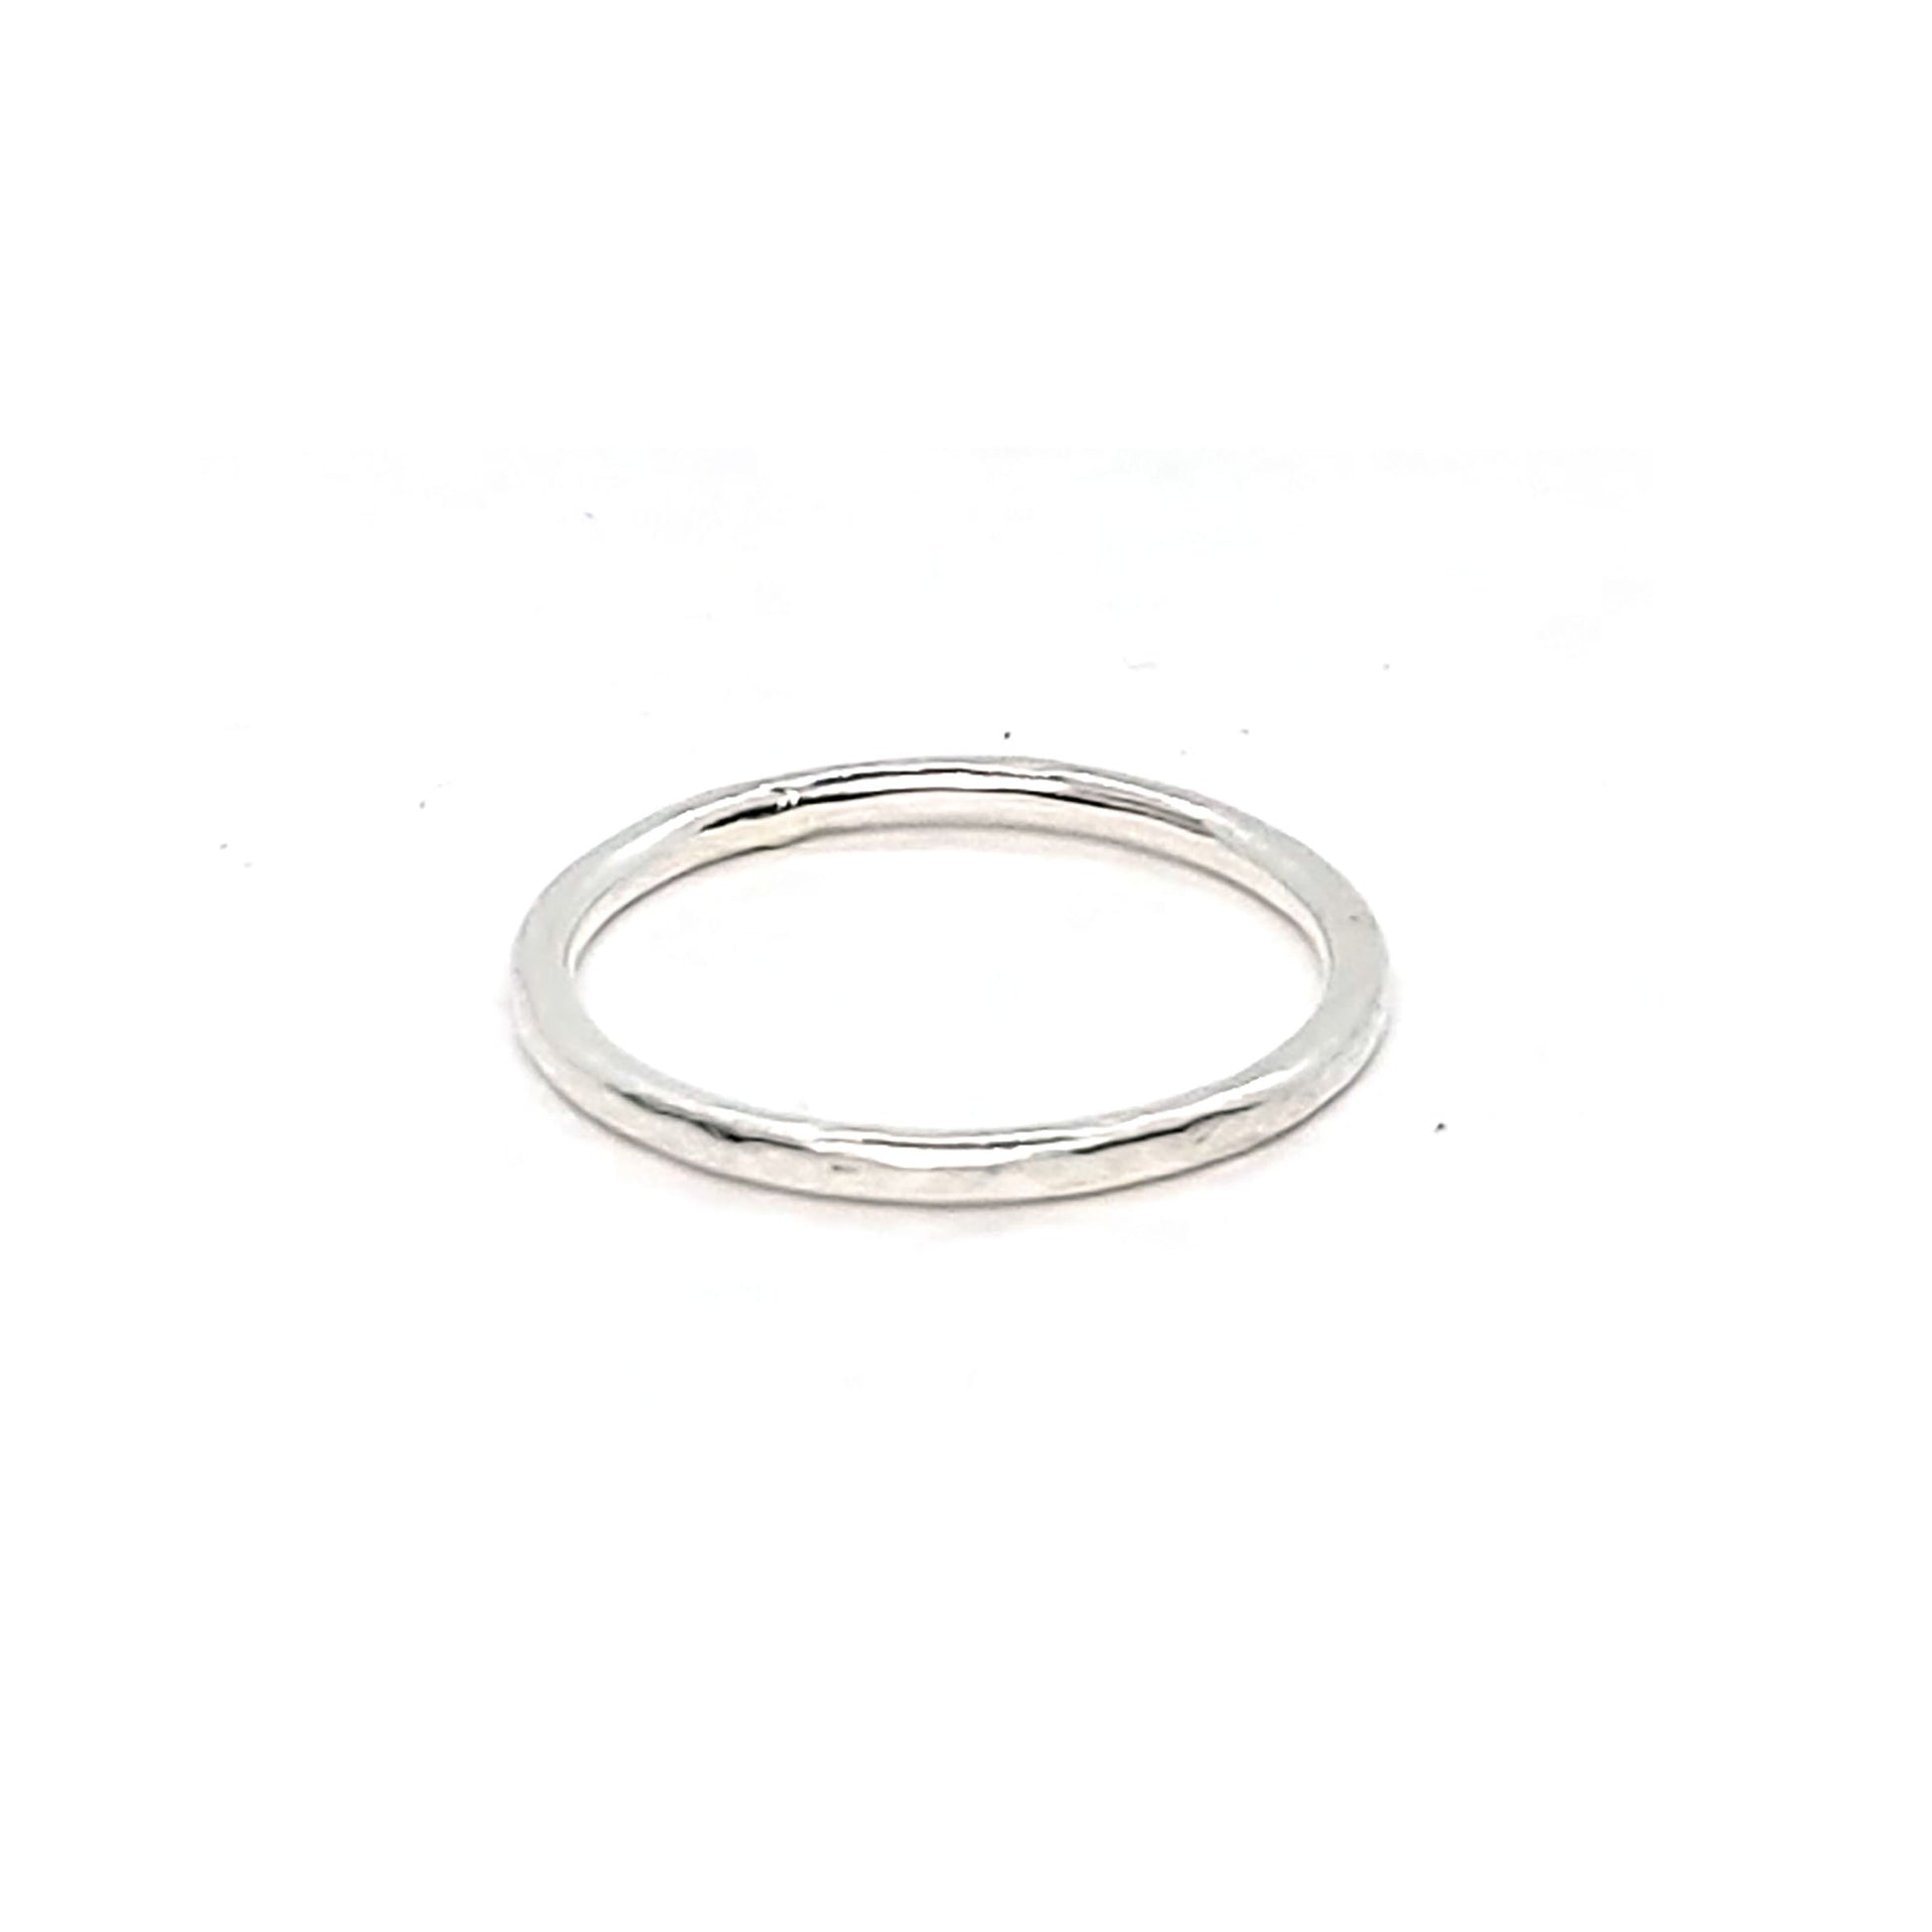 A thin silver stacking ring with a hammered finish.